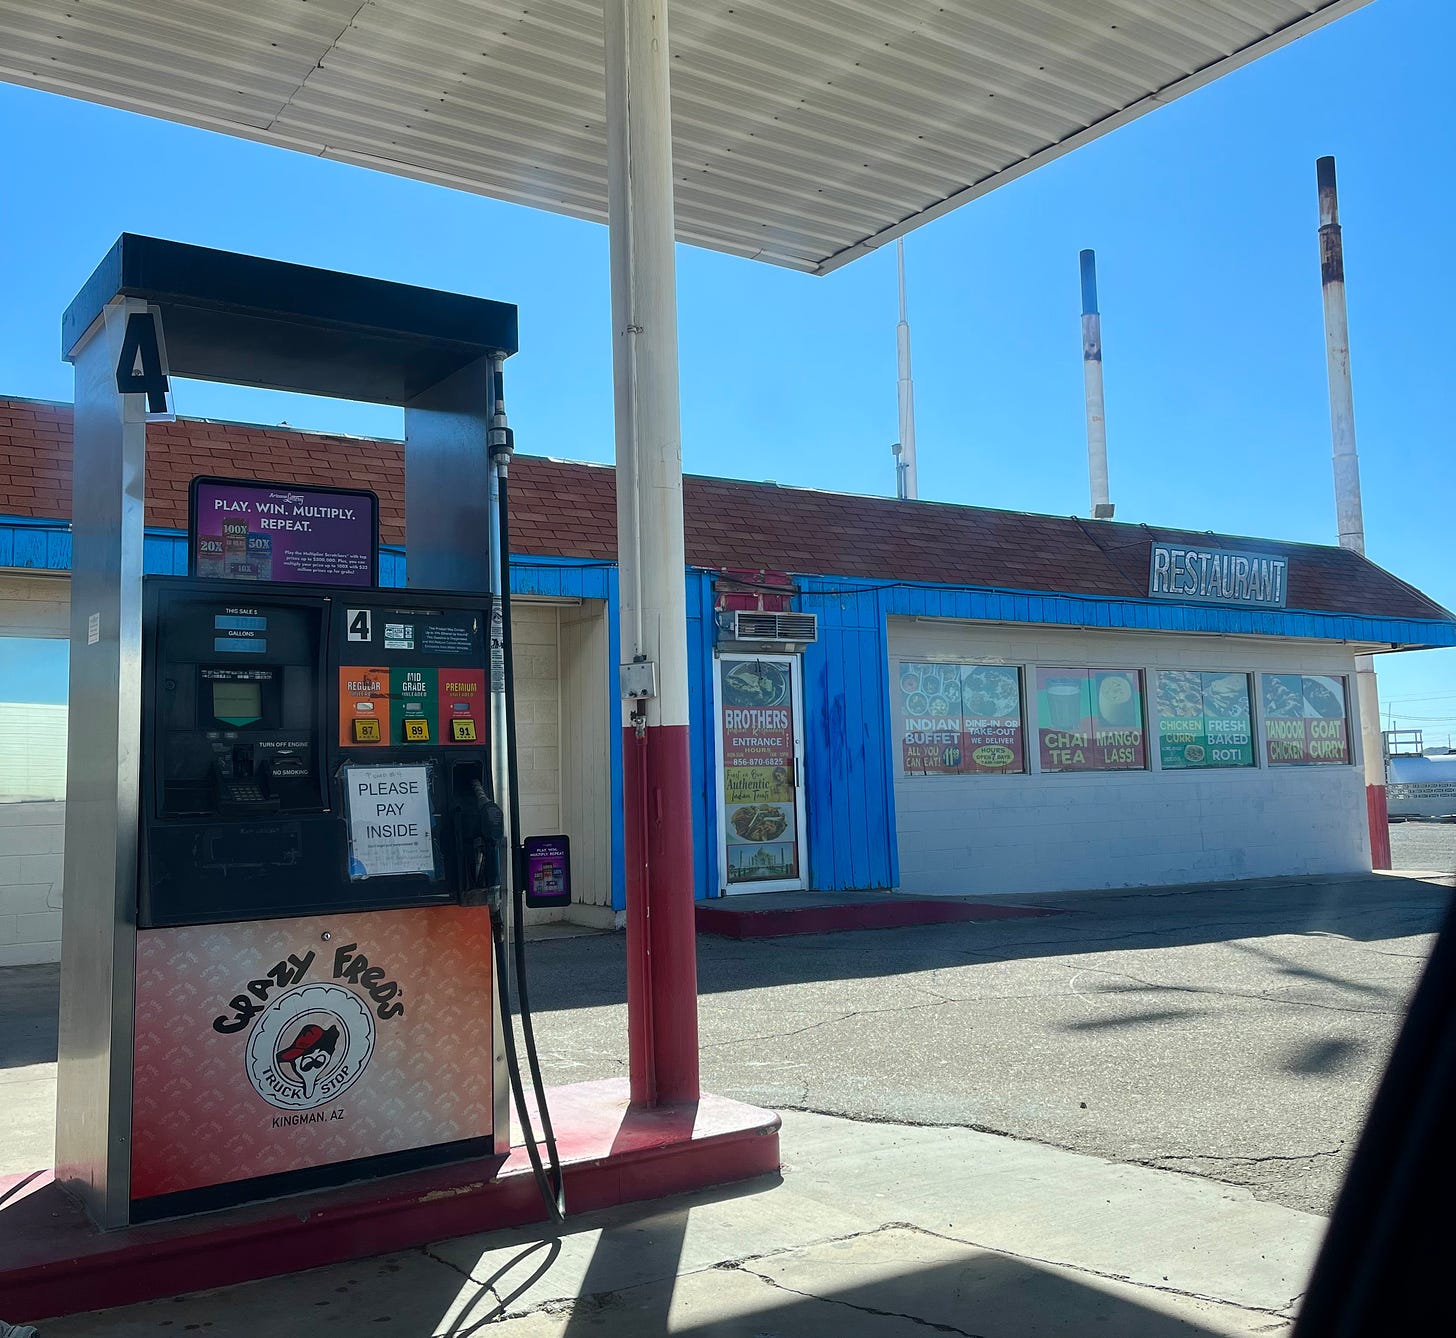 A gas station. The logo under a gas pump reads "Crazy Fred's" and has a cartoon man with a funny face on it. Behind is a building that says "BROTHERS" on the door. There's a sign that says RESTAURANT, and a bunch of window stickers with the specials: chicken curry, roti, mango lassi.